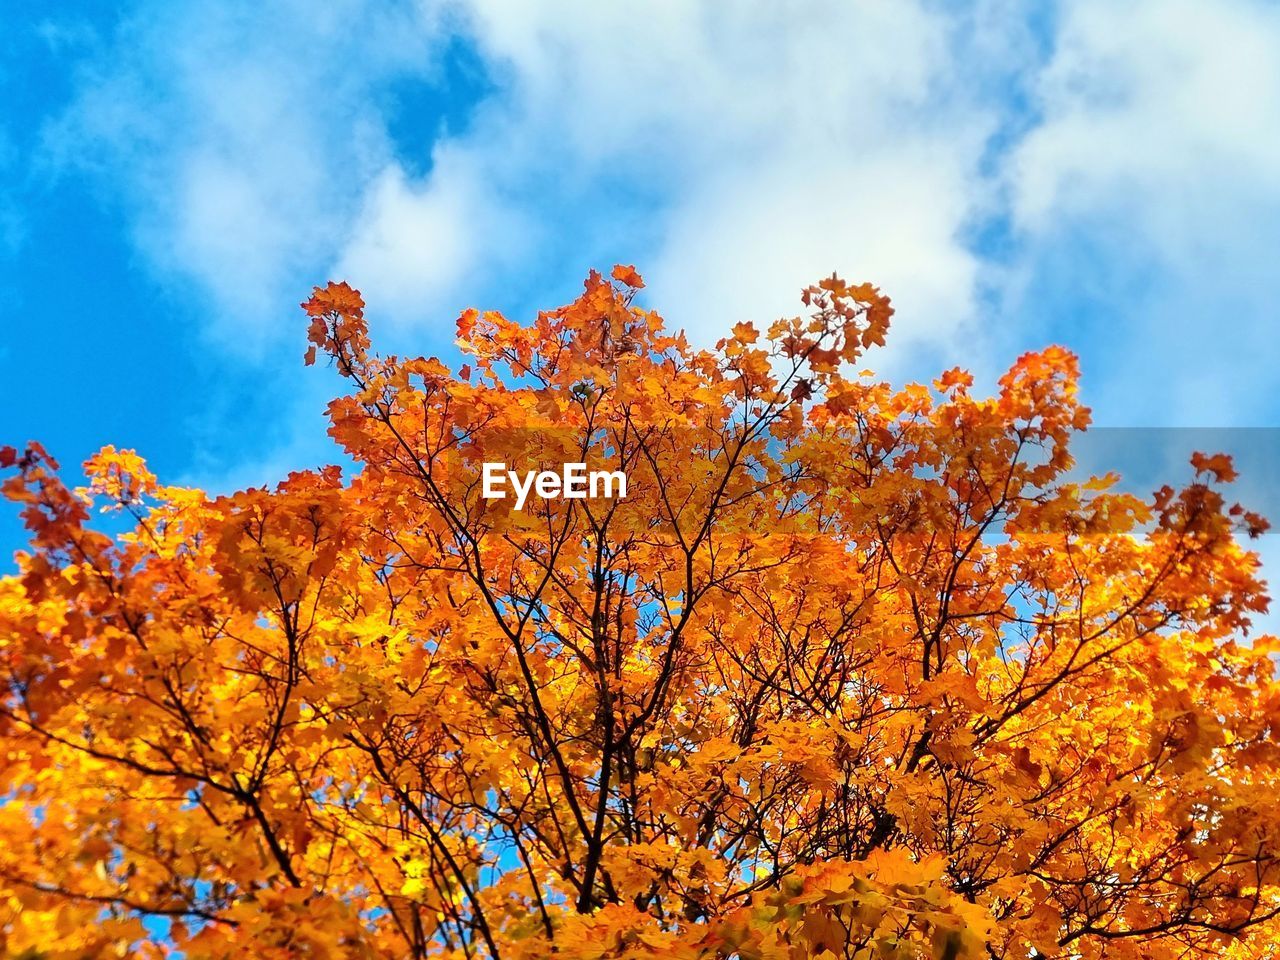 tree, autumn, plant, sky, beauty in nature, nature, orange color, leaf, plant part, cloud, branch, scenics - nature, yellow, environment, low angle view, no people, landscape, outdoors, vibrant color, tranquility, red, land, day, forest, multi colored, flower, blue, sunlight, idyllic, autumn collection, non-urban scene, growth, tranquil scene, maple tree